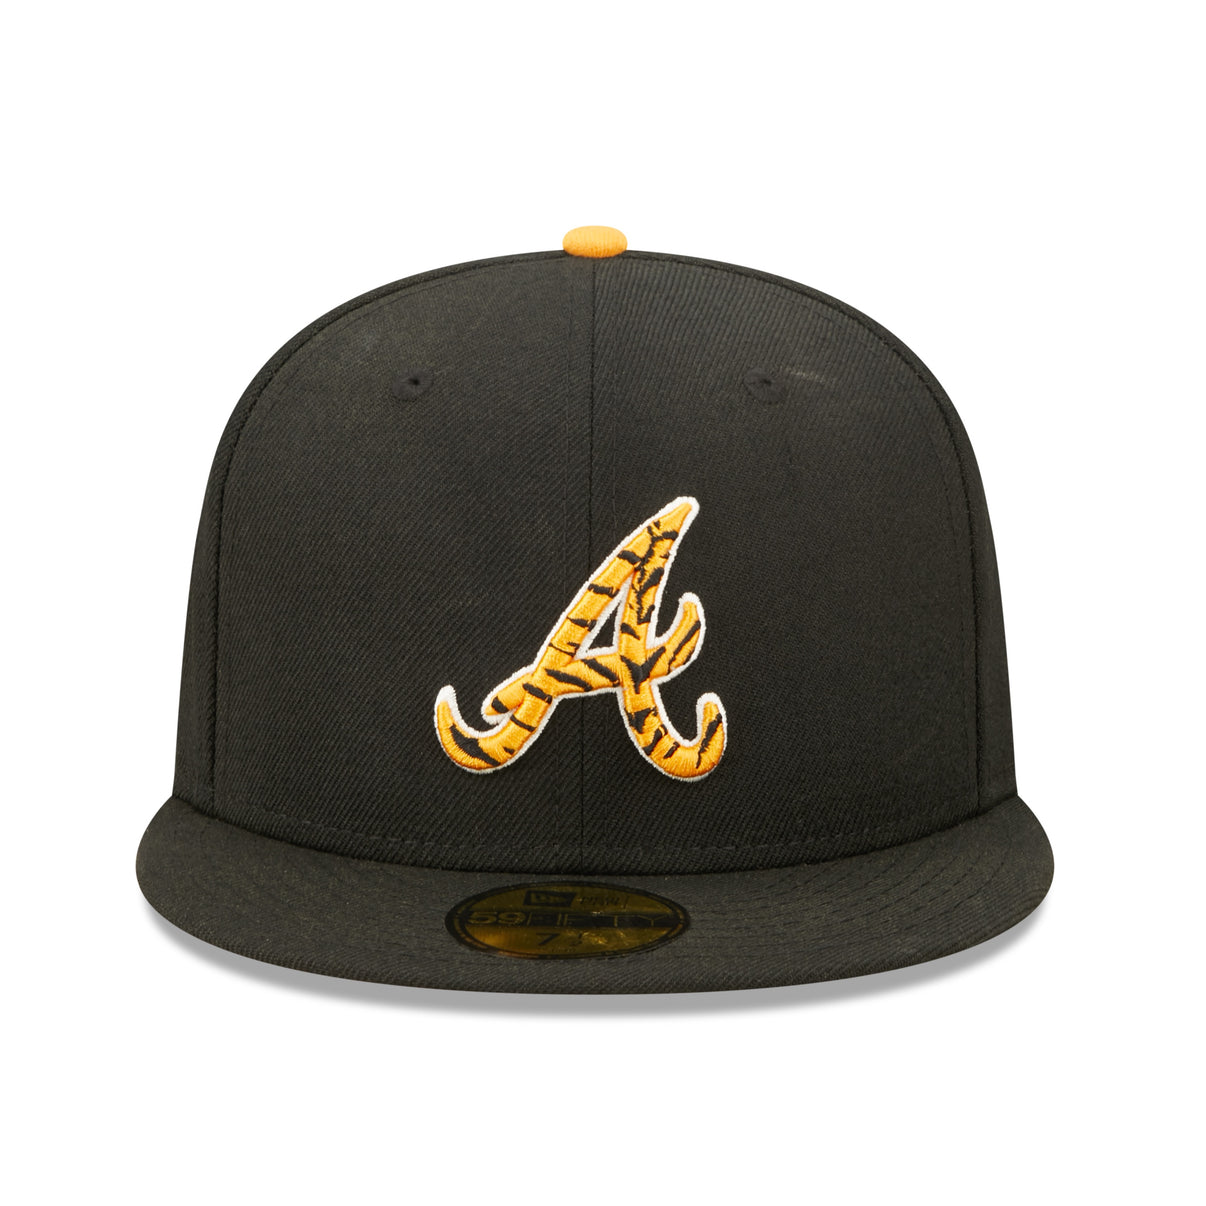 Los Angeles Dodgers on X: All gold everything for the Champs. The